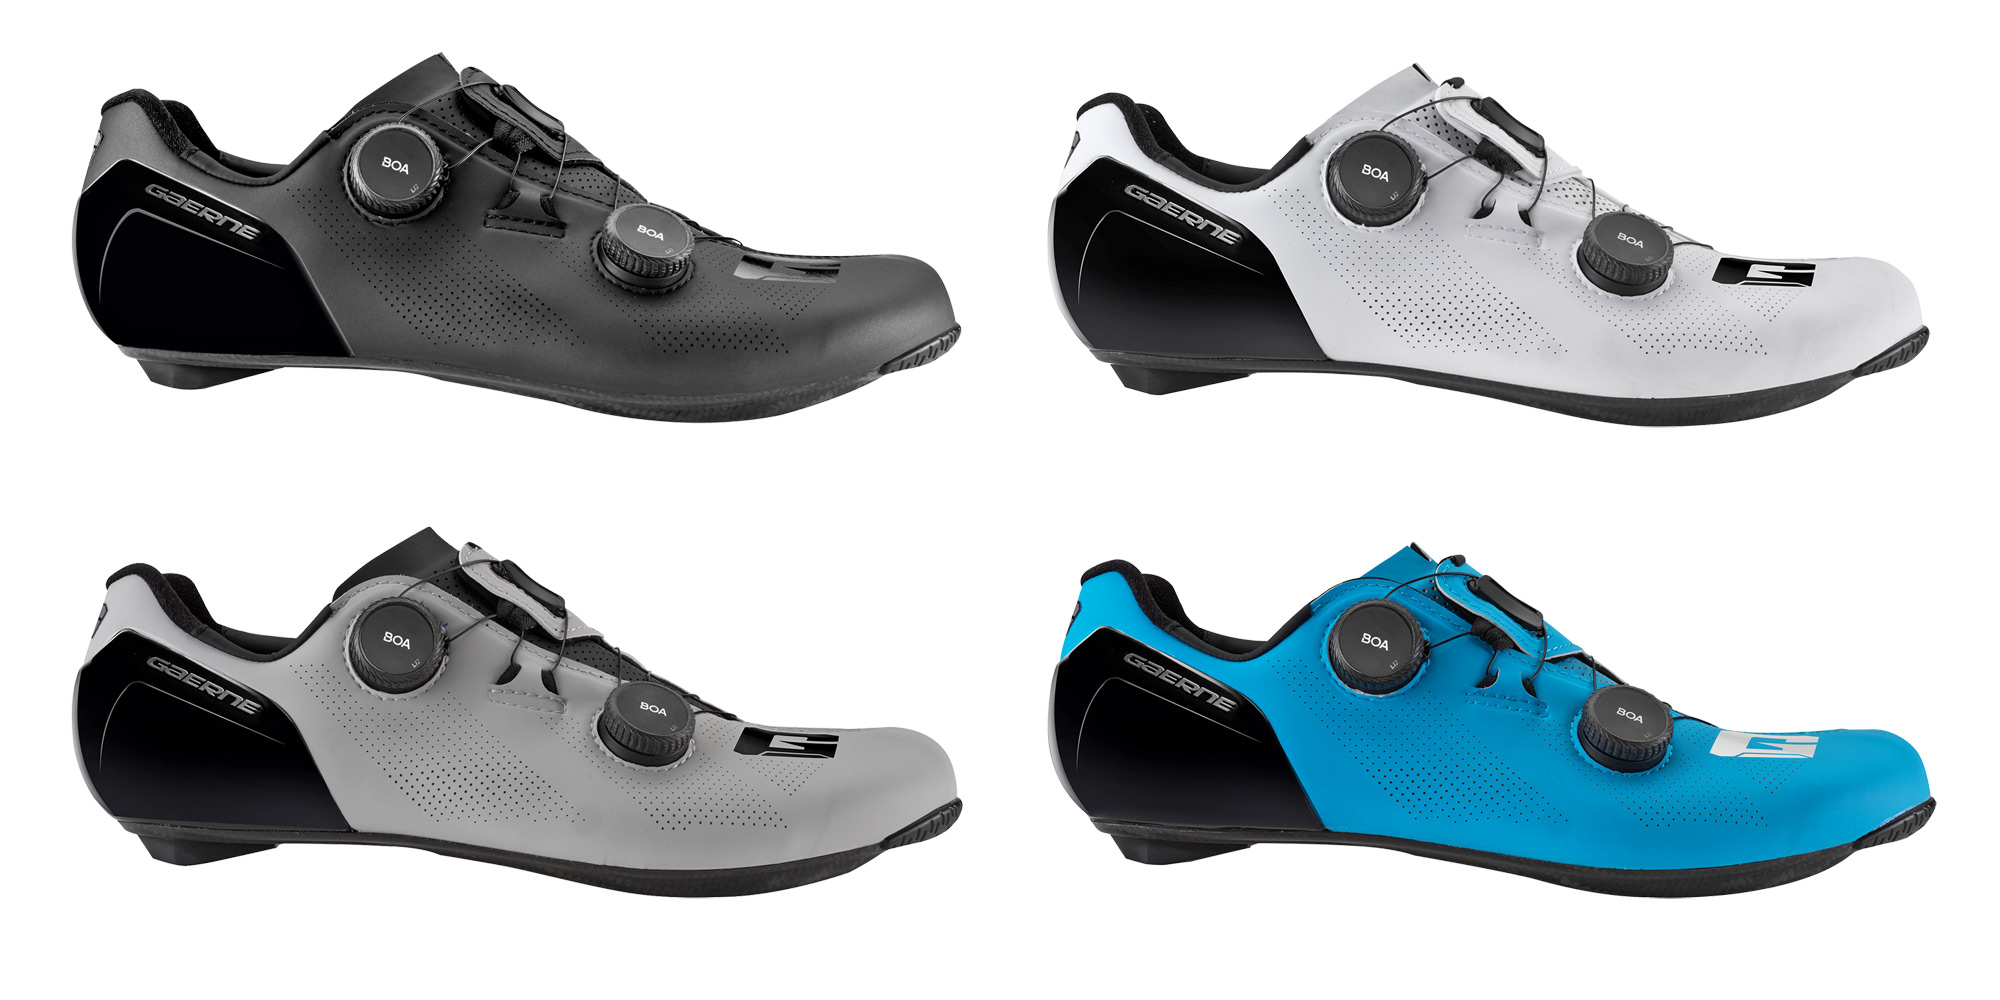 Gaerne G.STL road shoes, top-tier made-in-Italy performance carbon road race bike shoe, standard colors